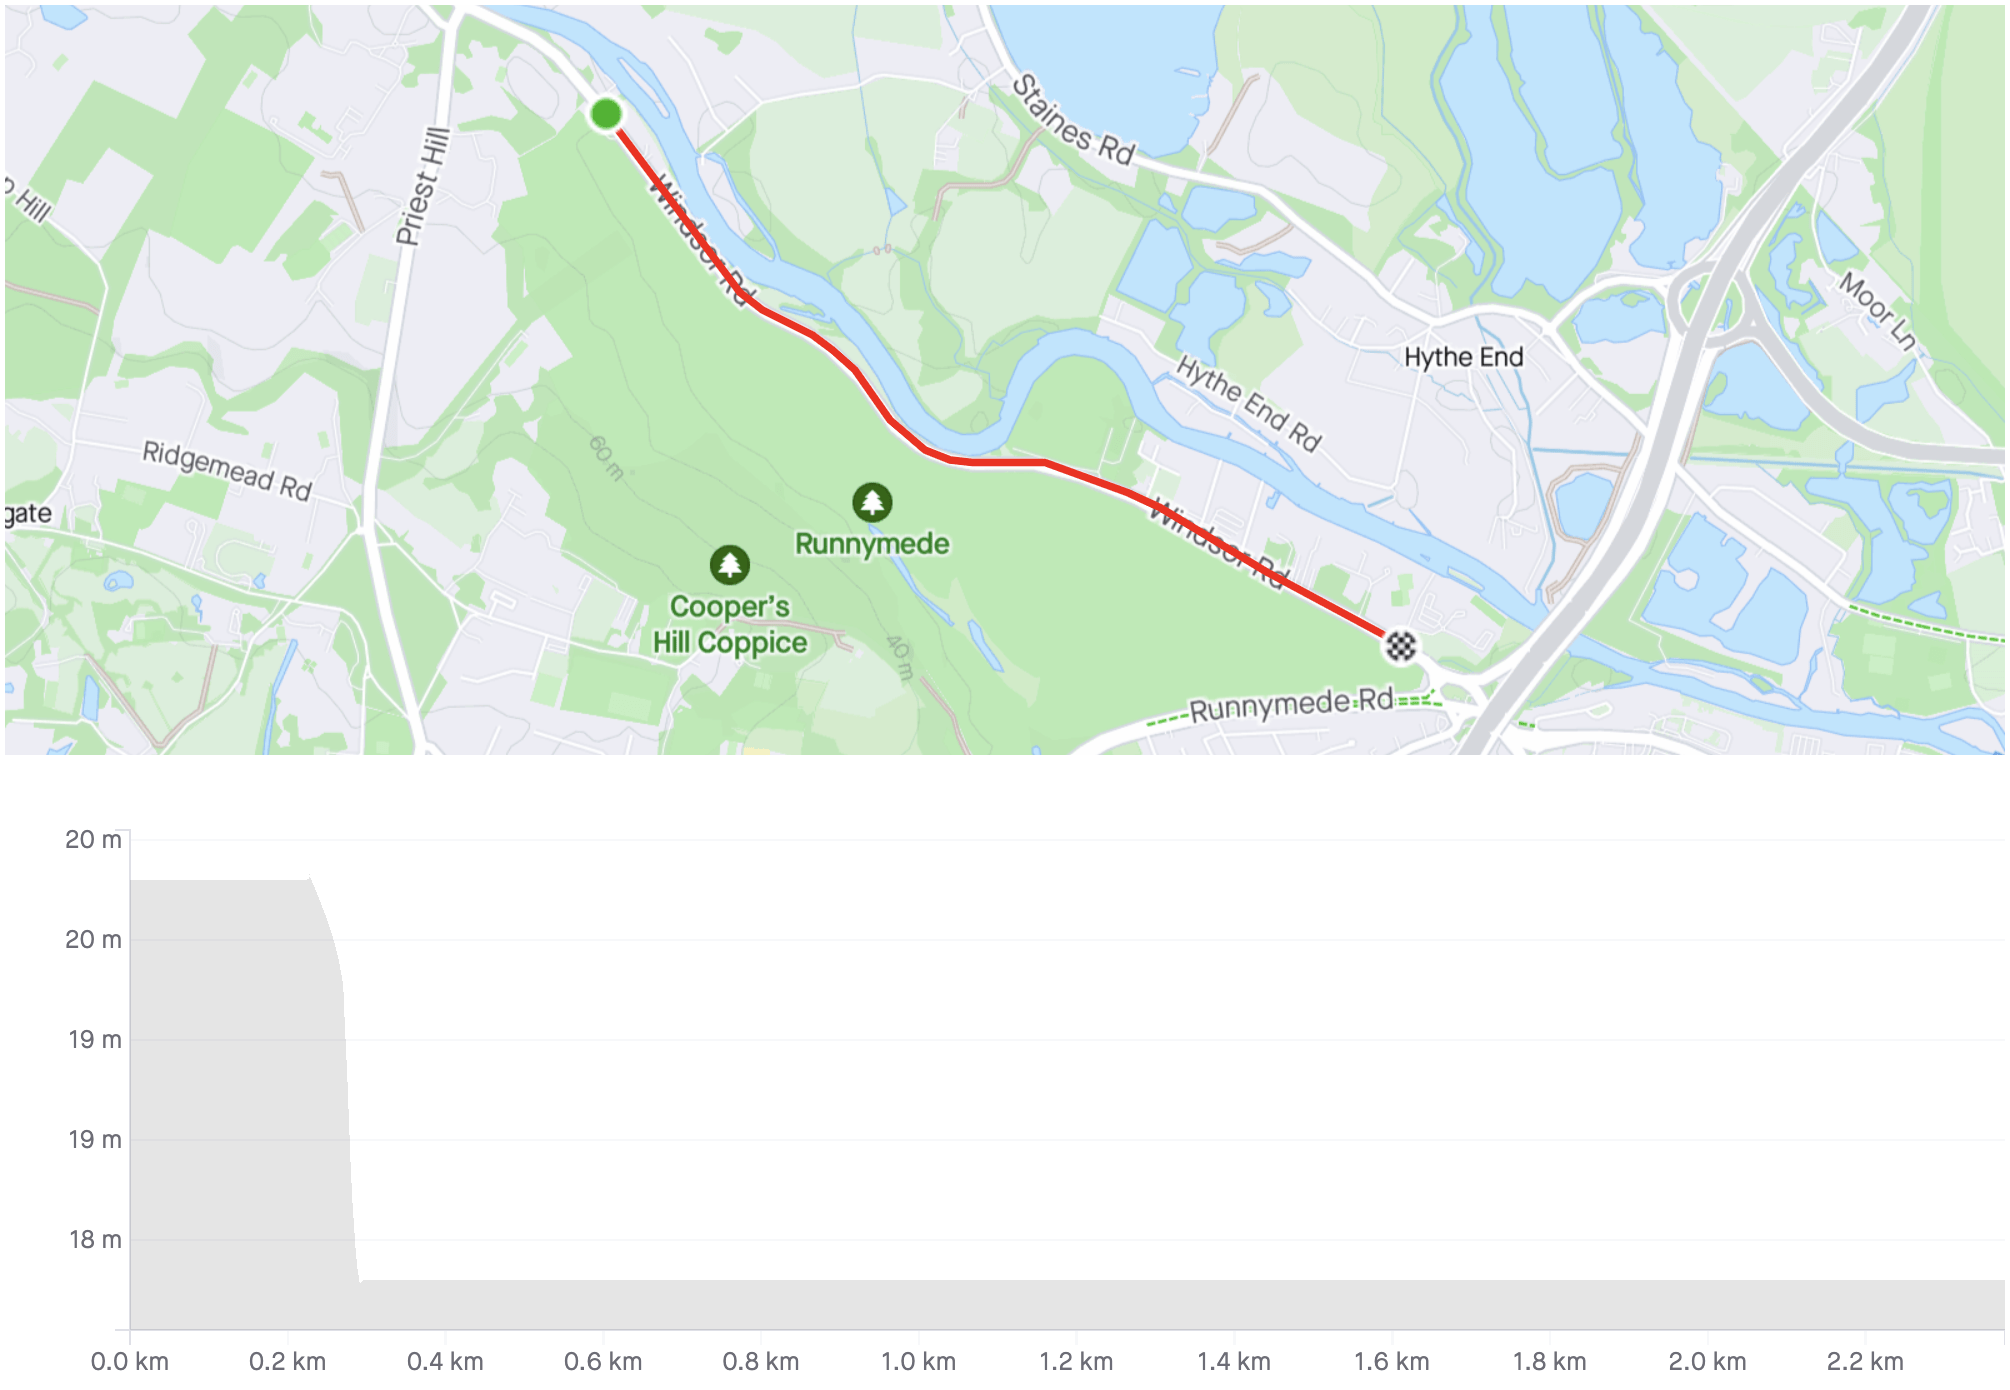 A map displaying the Surrey Cycling Club's running route.